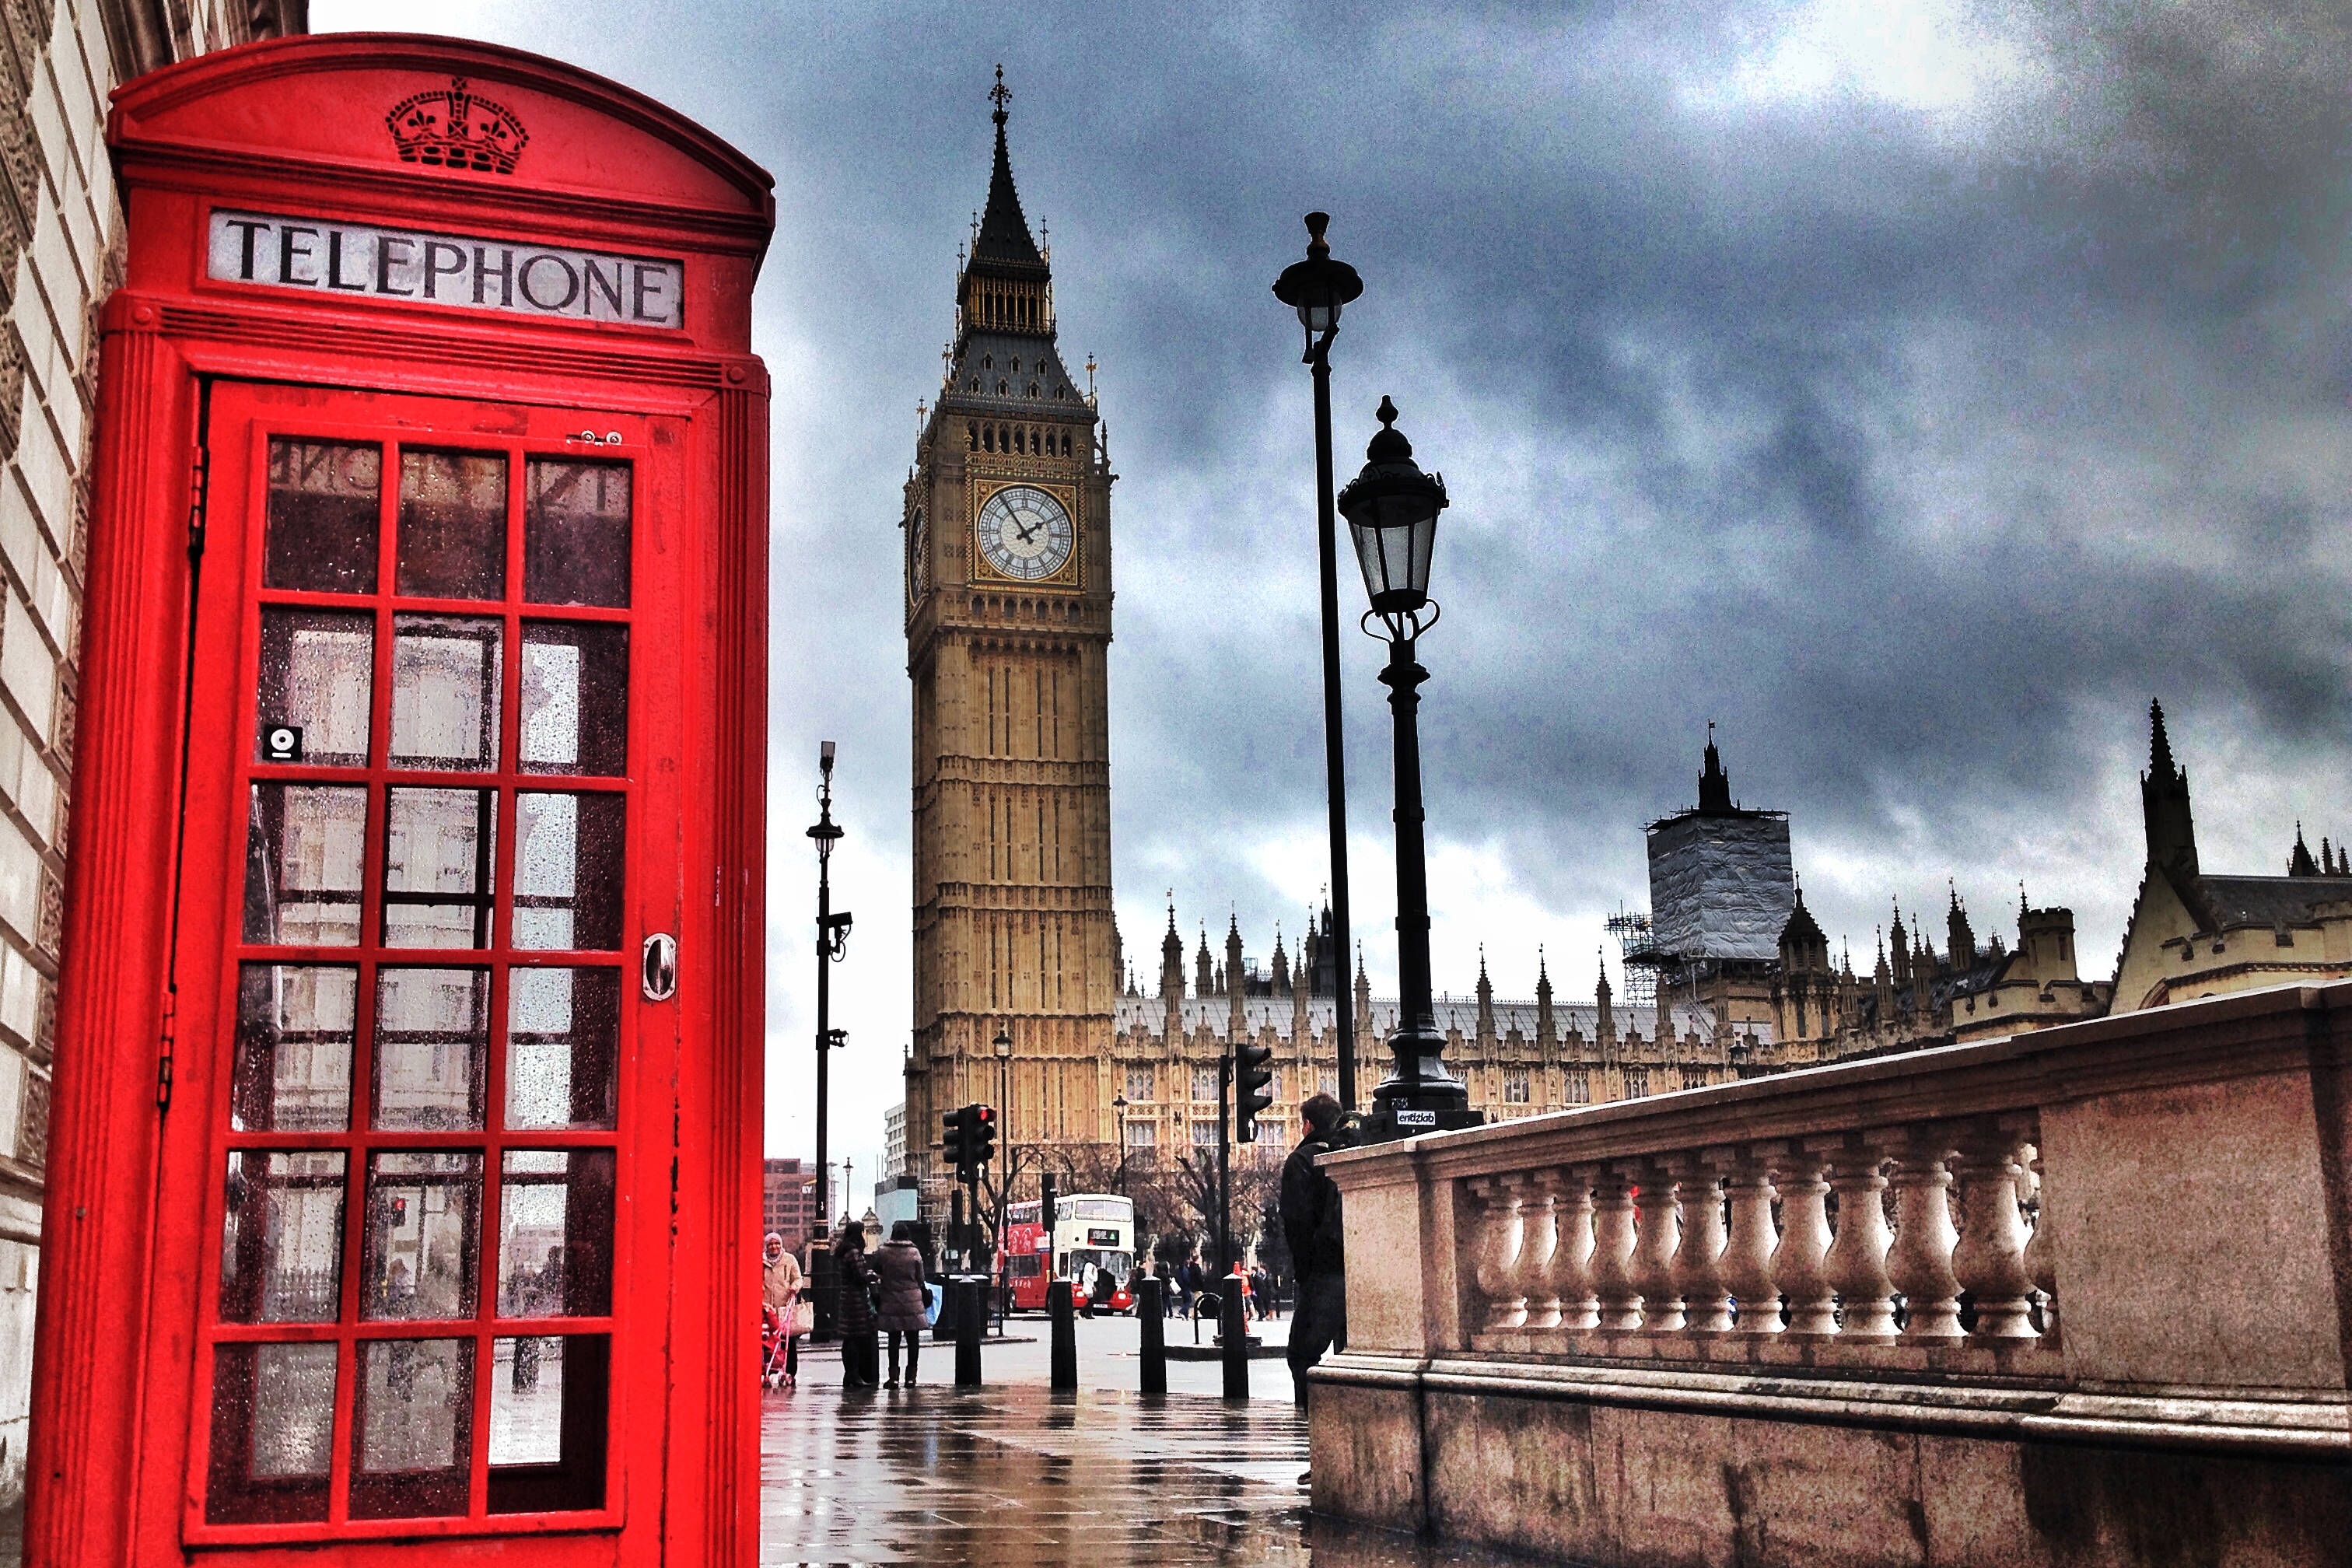 What You Should do on a Weekend in London